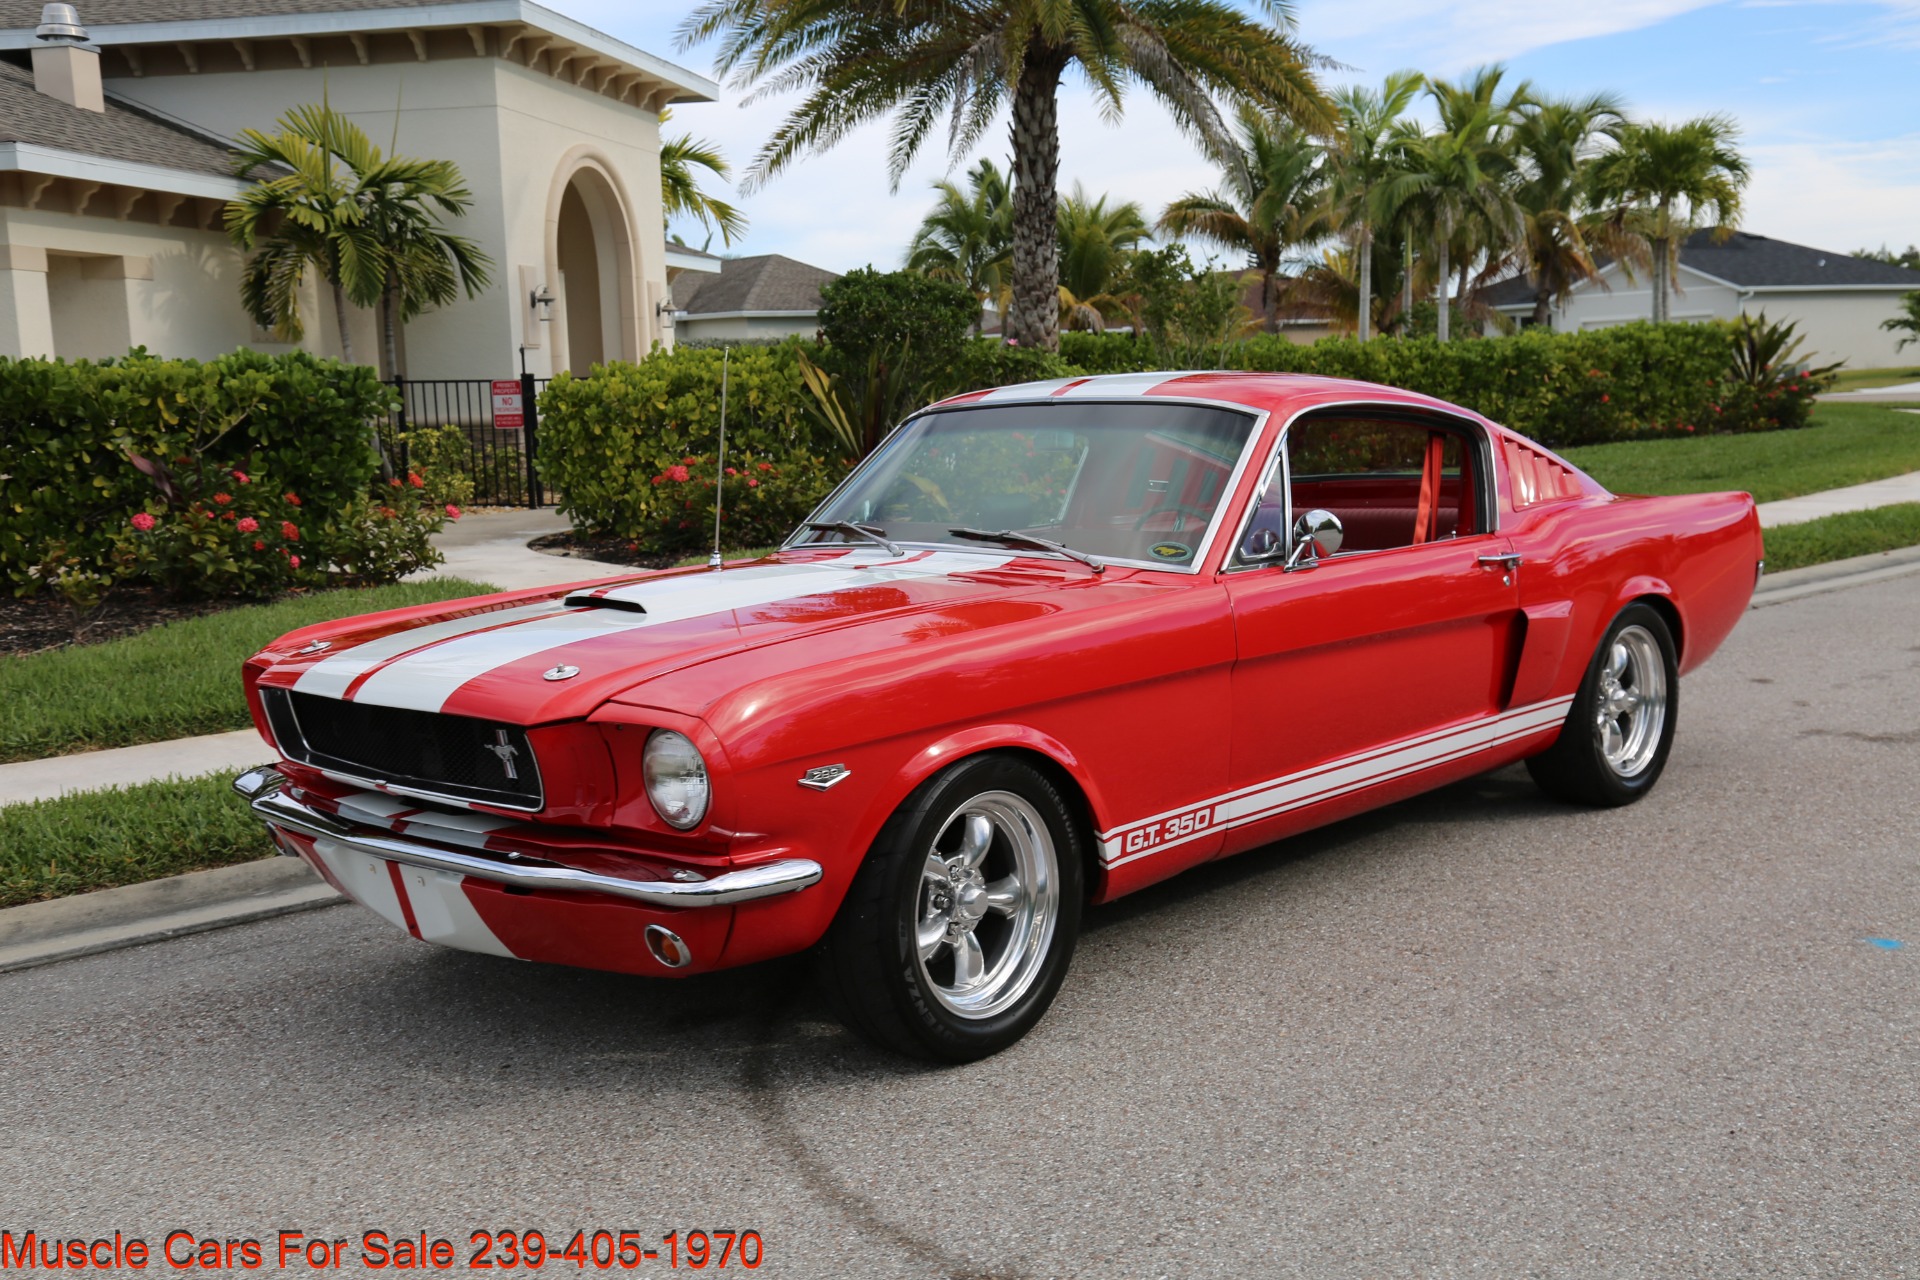 Ford Mustang 2+2 Fastback 1965